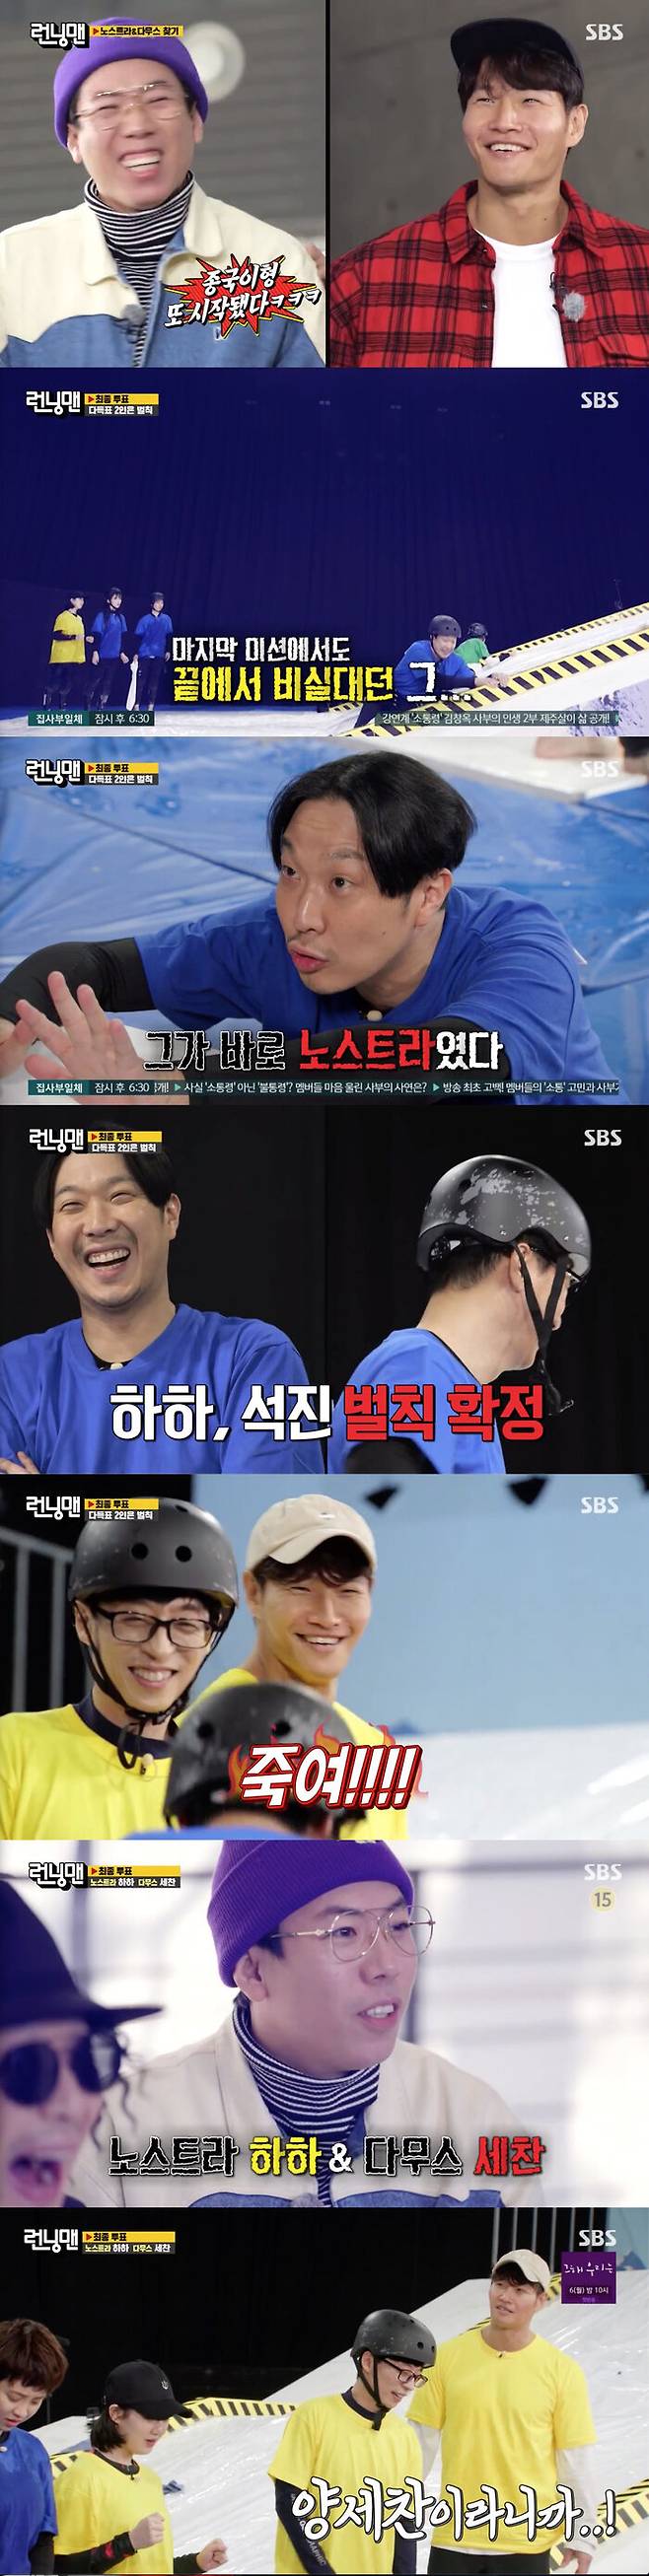 Kim Jong-kook has made Spy predictions today as well.On SBS Running Man broadcasted on the 28th, Premonitioners of the end of the century race was held with 99z.On this day, the members and guests visited the Premonition Nostra and Damus, who interfered with the Millennium.Kim Jong-kook doubted the two people by watching the expressions and actions of Haha and Yang Se-chan before the full-scale race began.Other members of the story of Kim Jong-kook, who had a high rate of Spys expected hit rate, were attracted to the two.The full-scale race was unfolded and the members doubted several members; Jin Ji-hee, who showed a somewhat passive appearance, and Ji Suk-jin, who was bustling every Premonition time, were the main characters.When the mission results prediction of Nostra and Damus failed in the last mission, opinions about Premonitioners were further divided.Premonition has started the round-up vote and Haha has voted with a more serious face than ever.The other members teased him, saying, Haha is it. Are you in trouble? There was a reason for Haha to consult on the voting time.He was the Nostra as many people expected.The results were announced after all the votes were over: Ji Suk-jin, who won a total of 13 votes, followed by Haha, who won nine votes, as Premonition Street.The penalties for the two have already been confirmed.The crew revealed the identity of Nostra, who rushed to Kim Jong-kook, who first suspected him and made everyone suspicious when he was identified.Kim Jong-kook laughed at the difficulty of saying, I can see it even if I look at the expression.Then the identity of Damus was revealed: Damus was Yang Se-chan, not Ji Suk-jin.He focused on avoiding doubt rather than being hit by Premonition, feeling a stagnation crisis for Kim Jong-kook early on, and in the last vote he avoided penalties by pushing public opinion with Ji Suk-jin.At the end of the broadcast, Yang Se-chans birthday was celebrated with We are entertainer family - Hyoja-dong Yang Se-chan Race, which raised expectations.